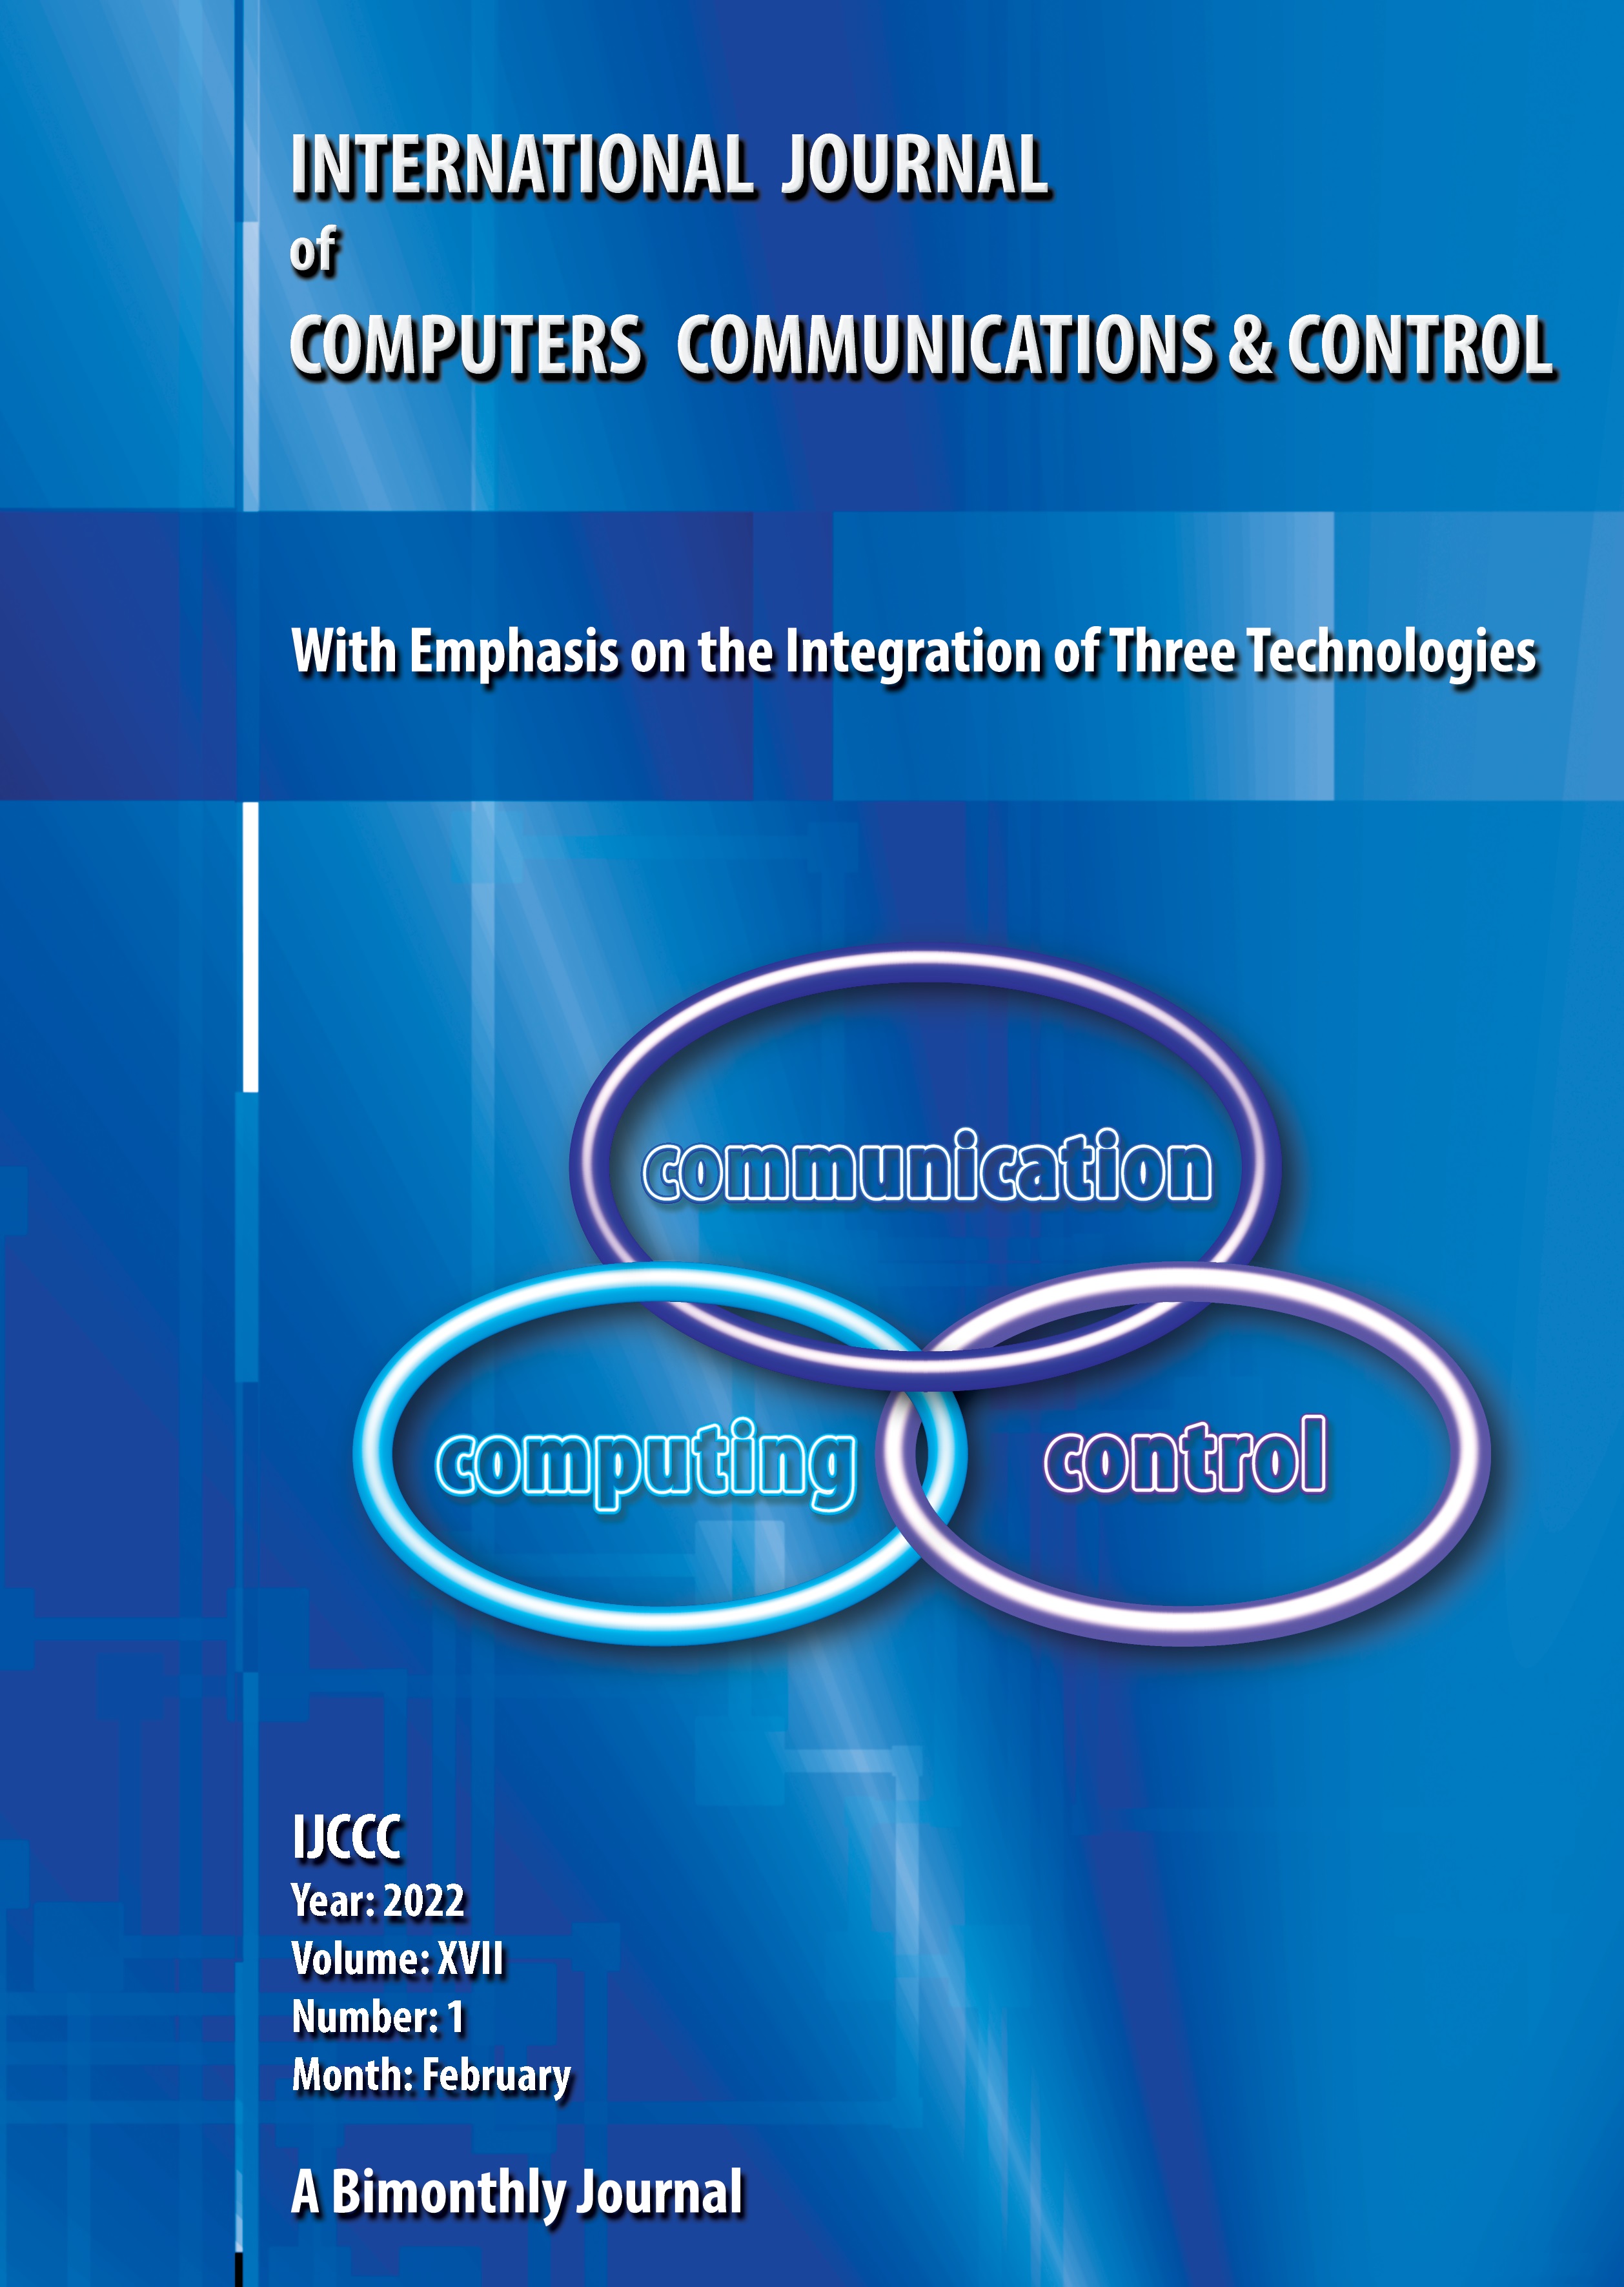 					View Vol. 17 No. 1 (2022): International Journal of Computers Communications & Control (February)
				